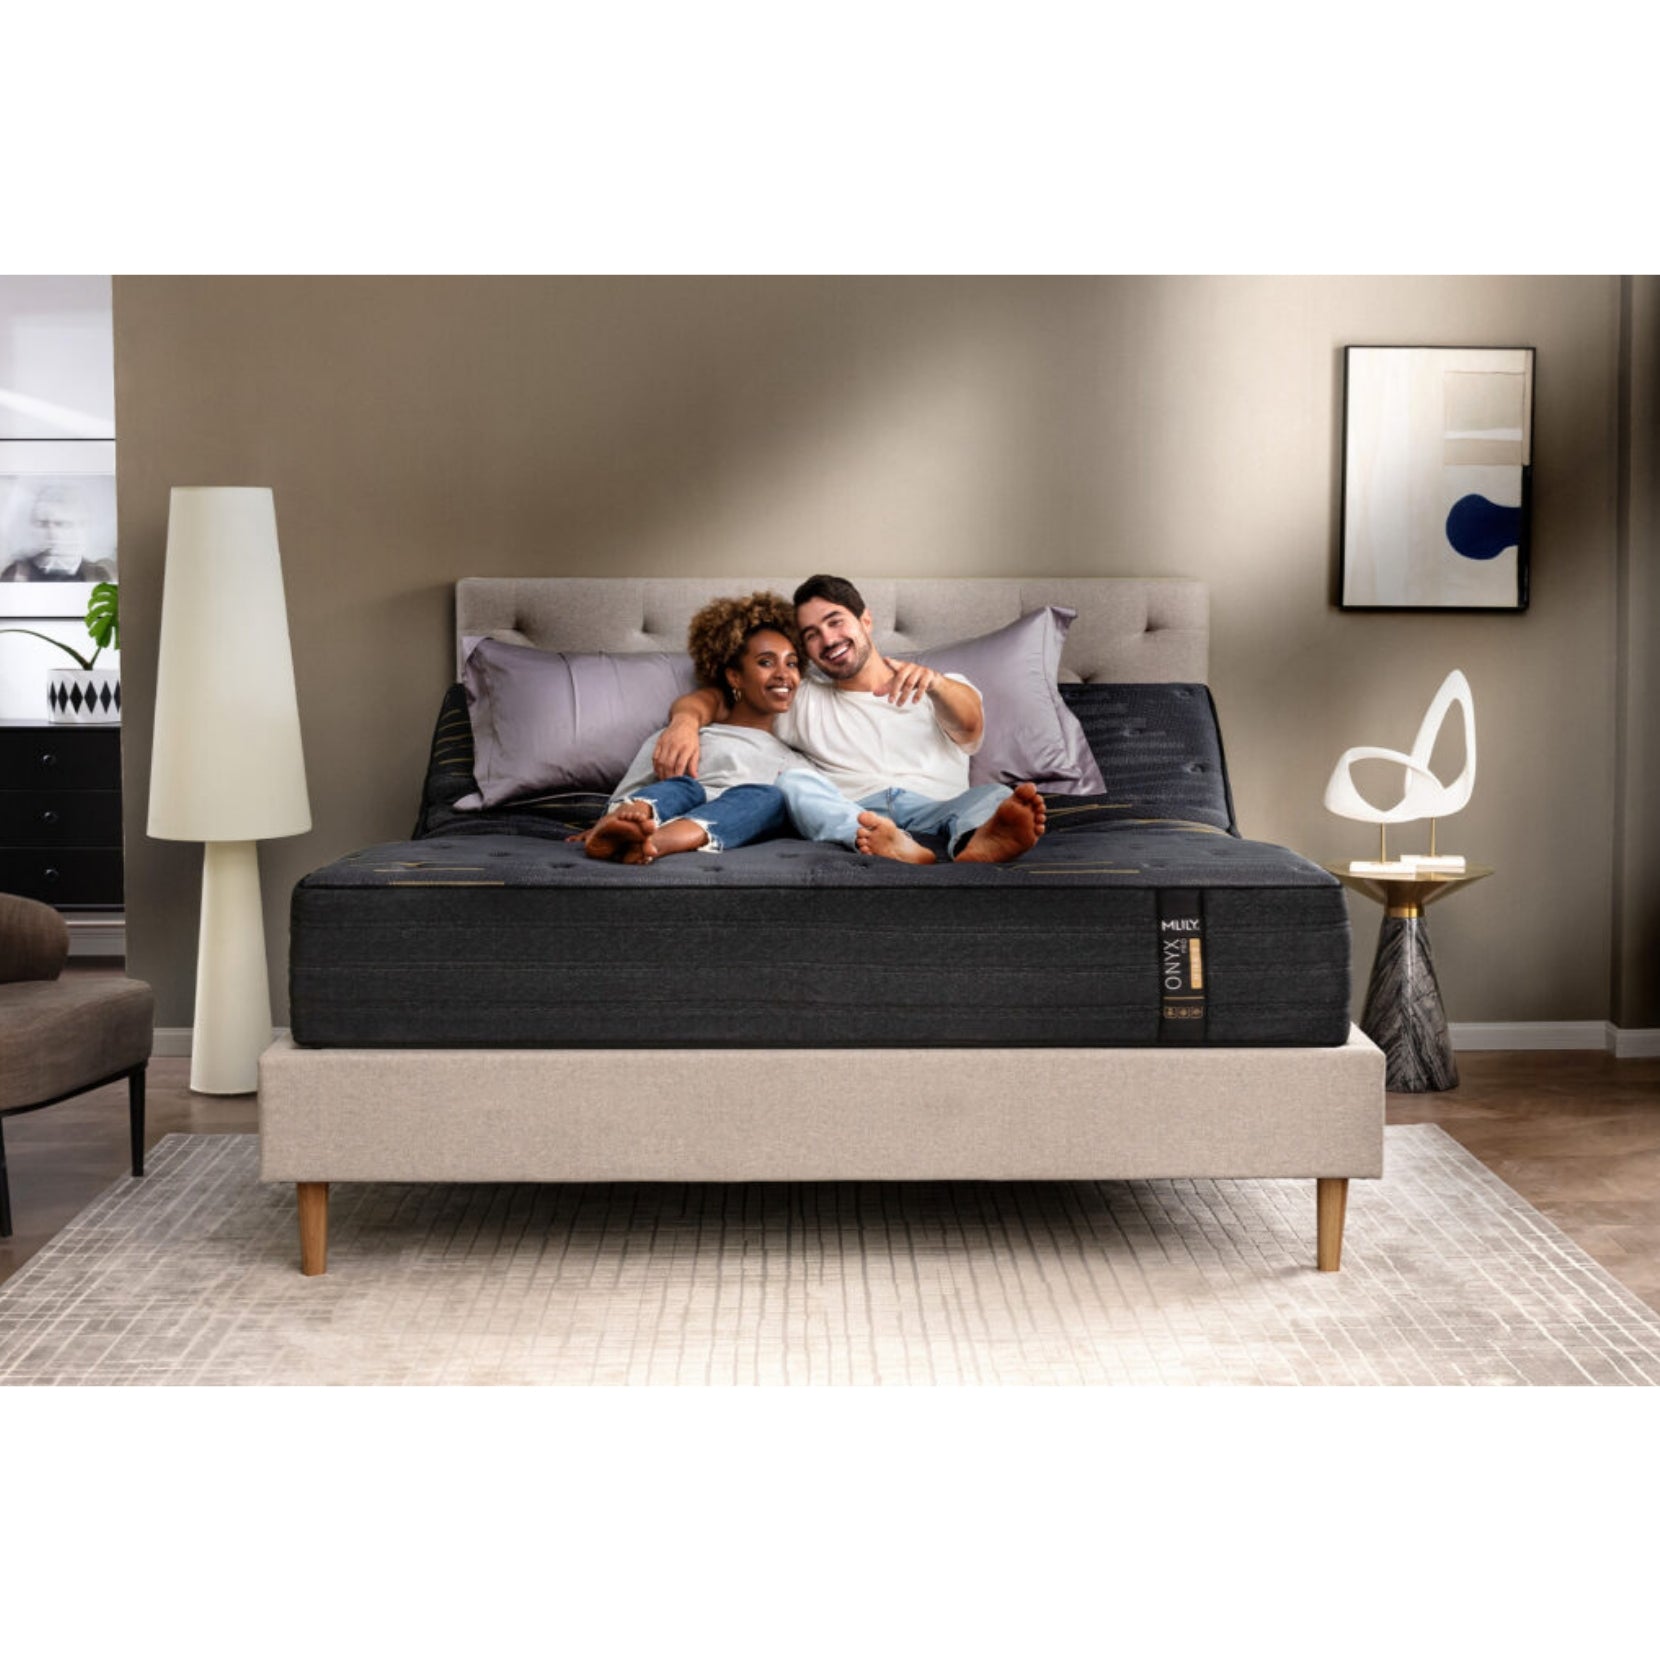 ONYX Pro 13" Hybrid Mattress With Copper Infused Memory Foam Inside Of A Bedroom With A Man And Woman Enjoying Each Other's Company